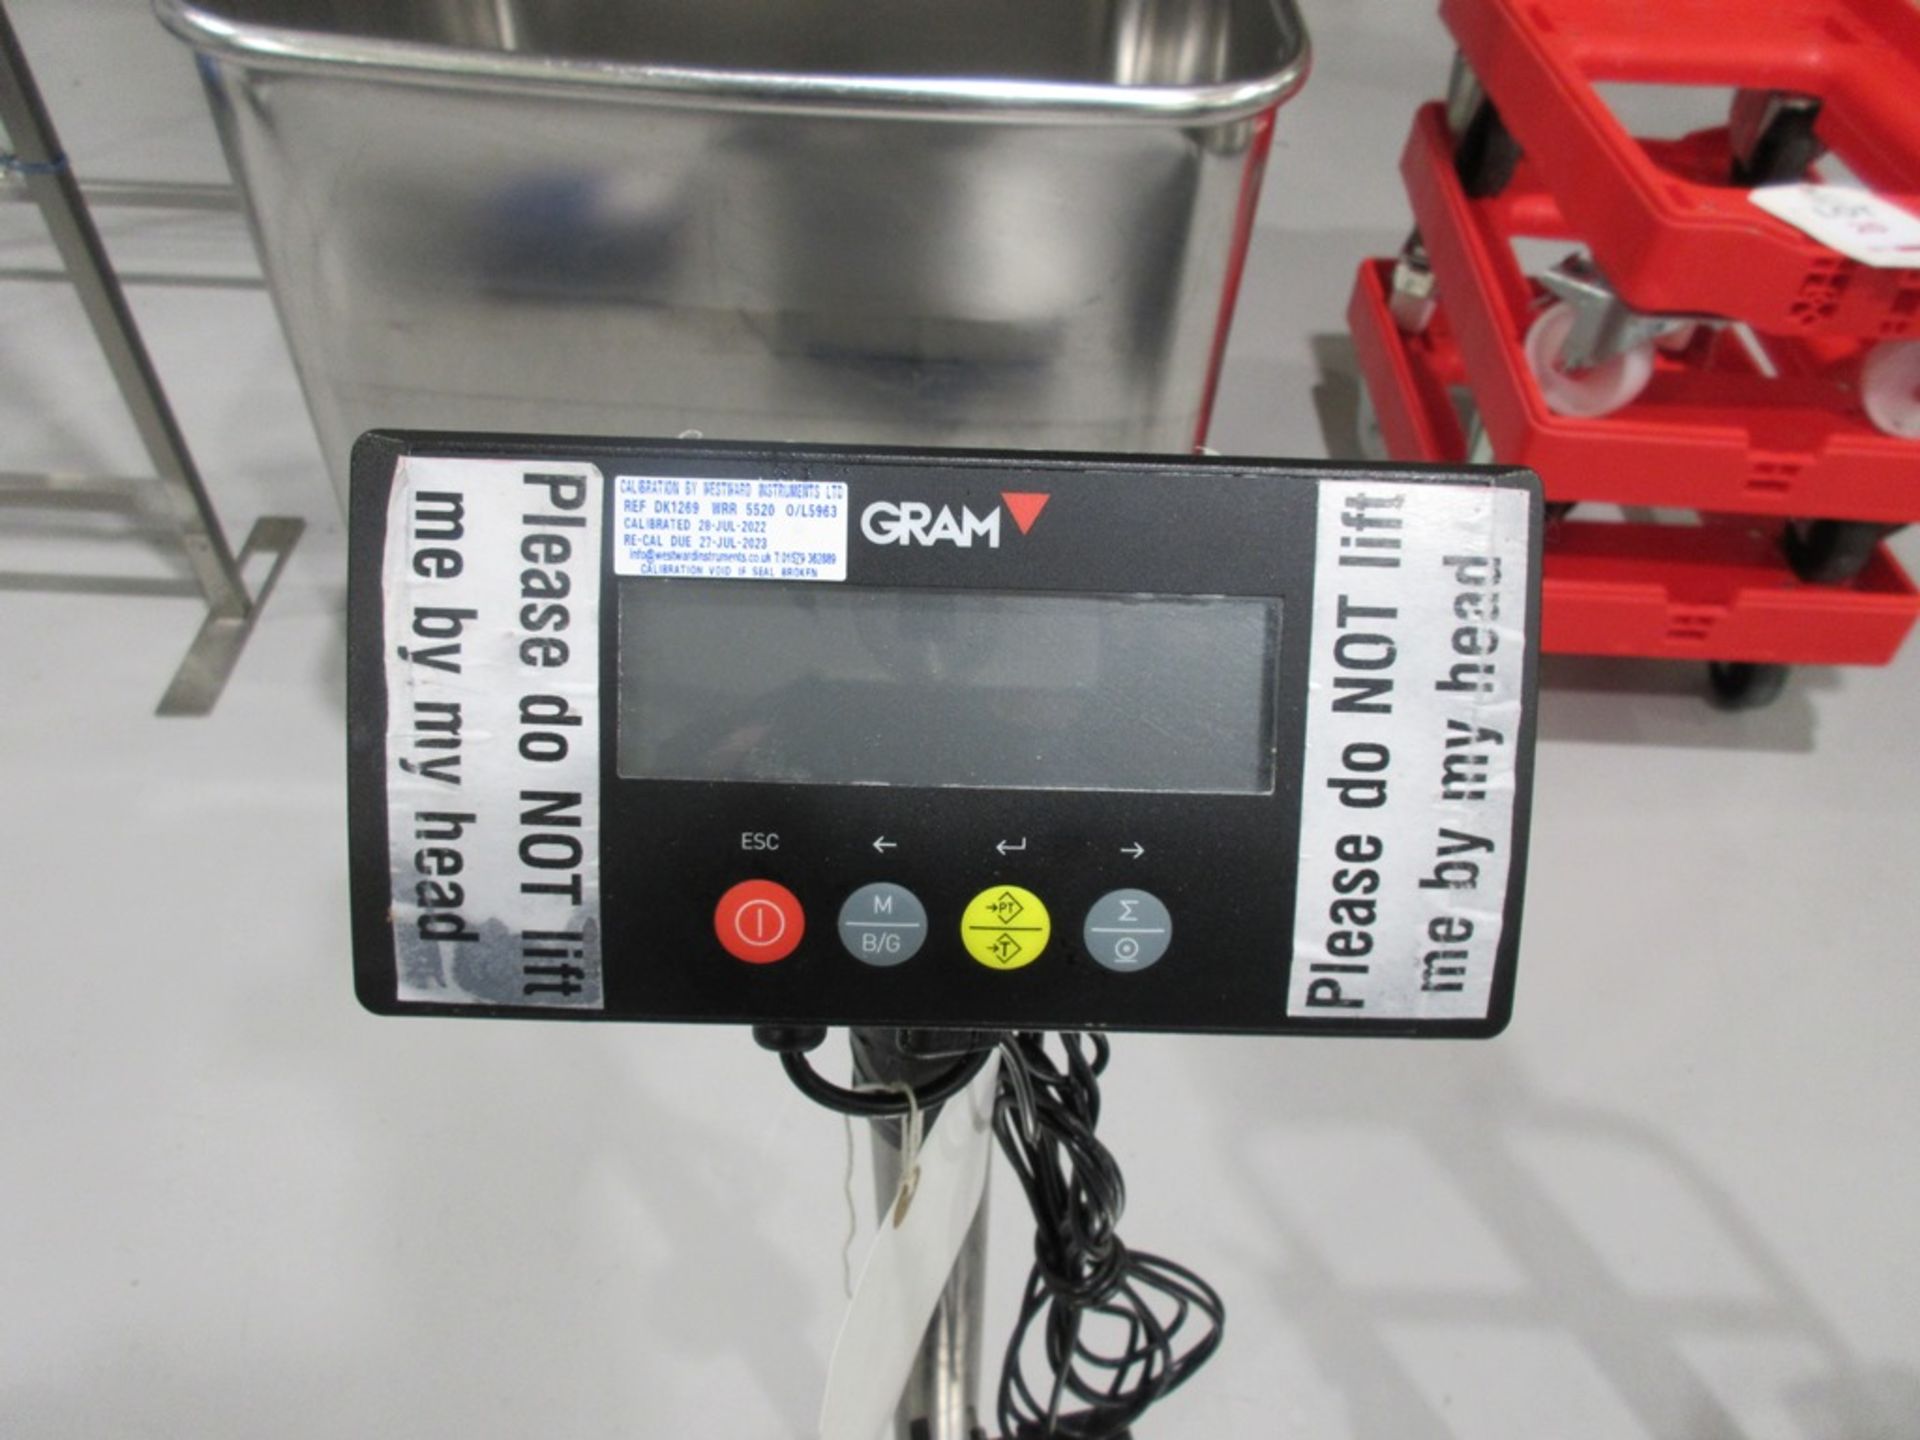 GRAM electronic weighing scales, serial no. 0000394639 - Image 2 of 3